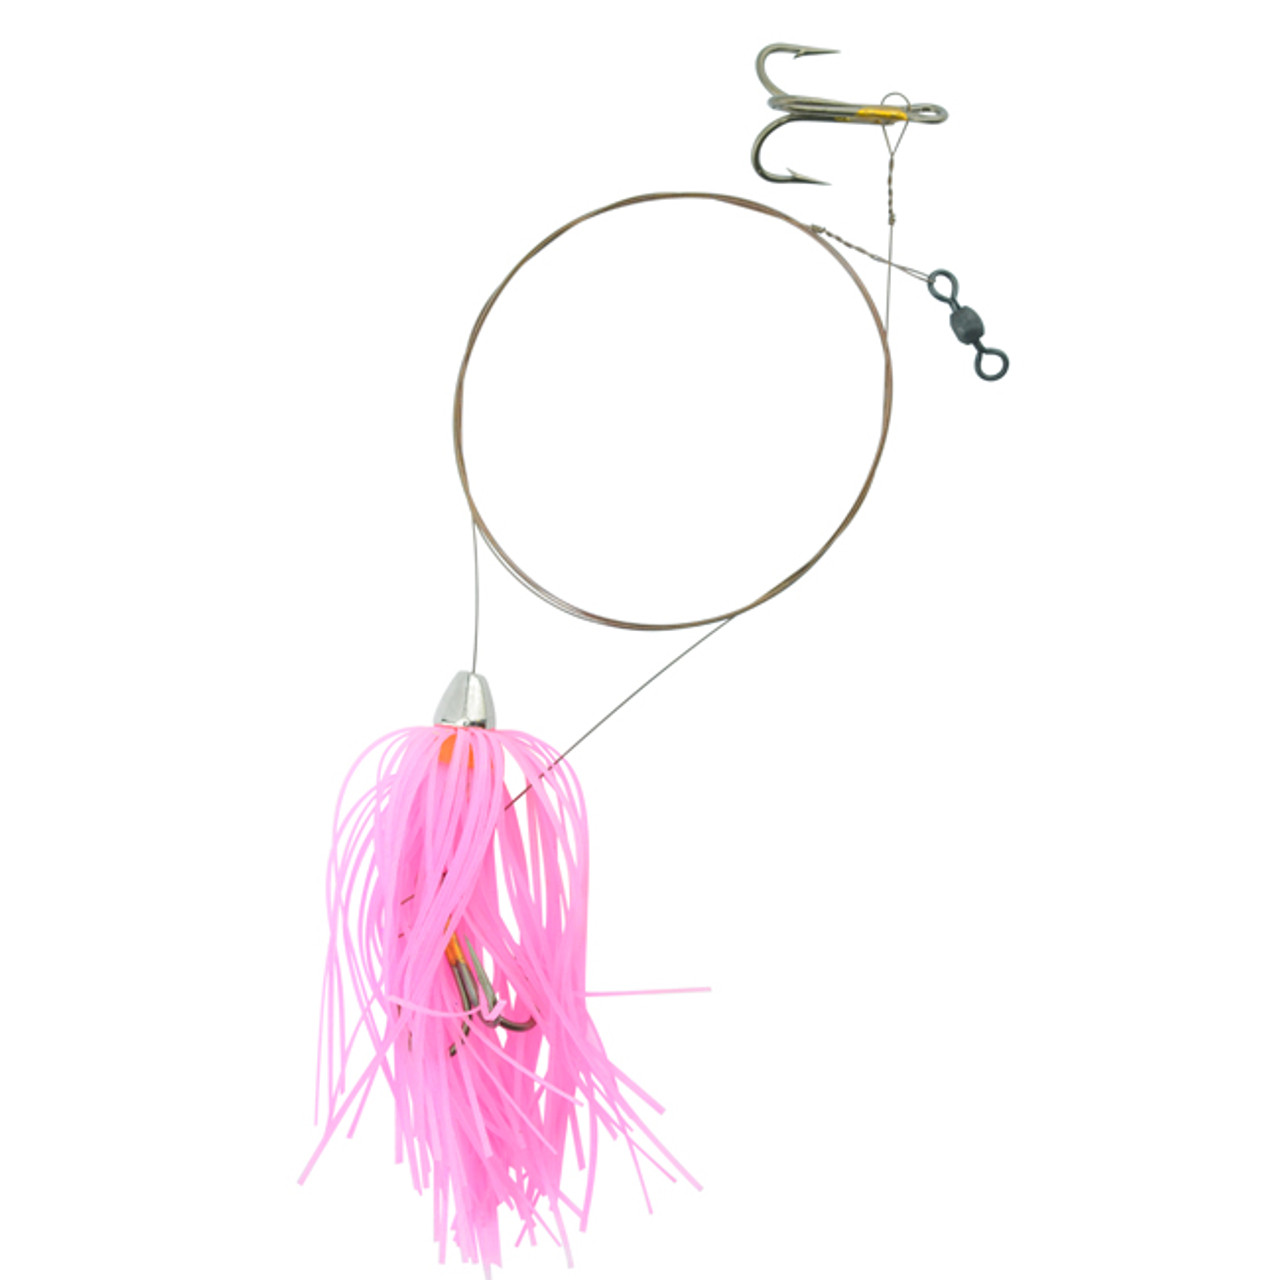 C&H Lures - Kingfish Pro-Rig with King Buster Lures - Pink/Glow Skirt 